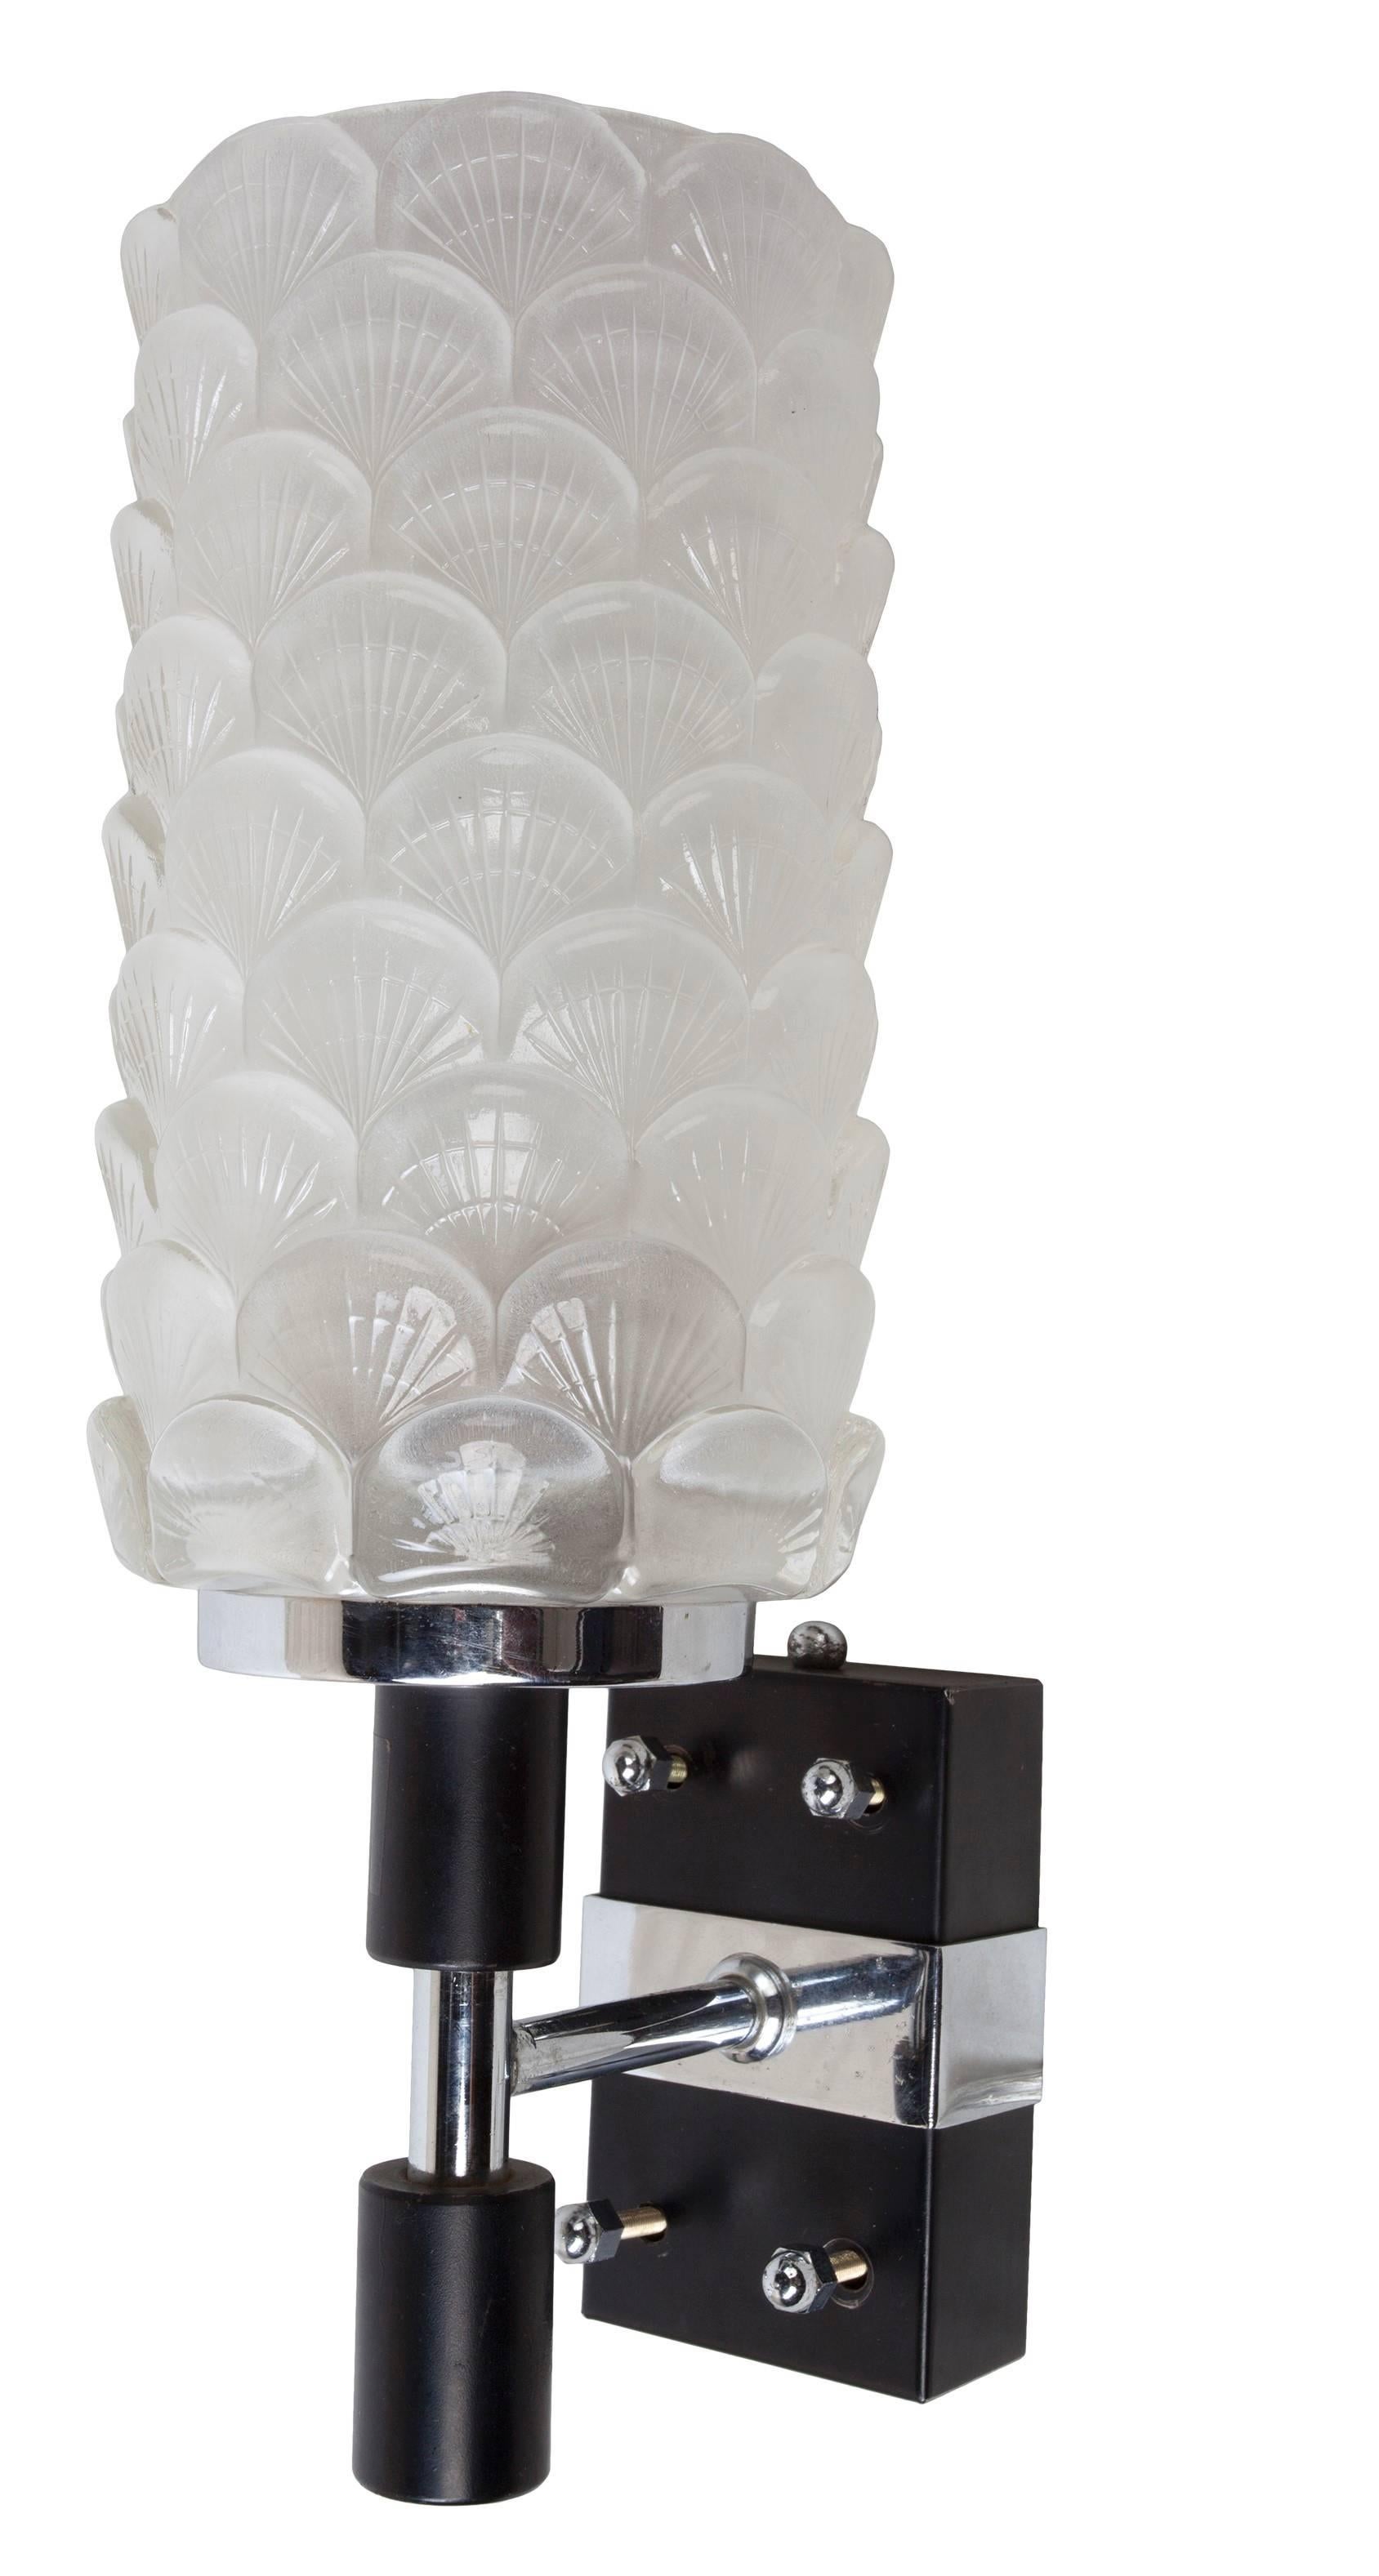 A pair of exquisite deco-period glass sconce shades with shell motif on chrome and black metal backplates. Rewired for American use, porcelain socket and takes a regular size light bulb. European. As of this writing I have two pairs.

Base